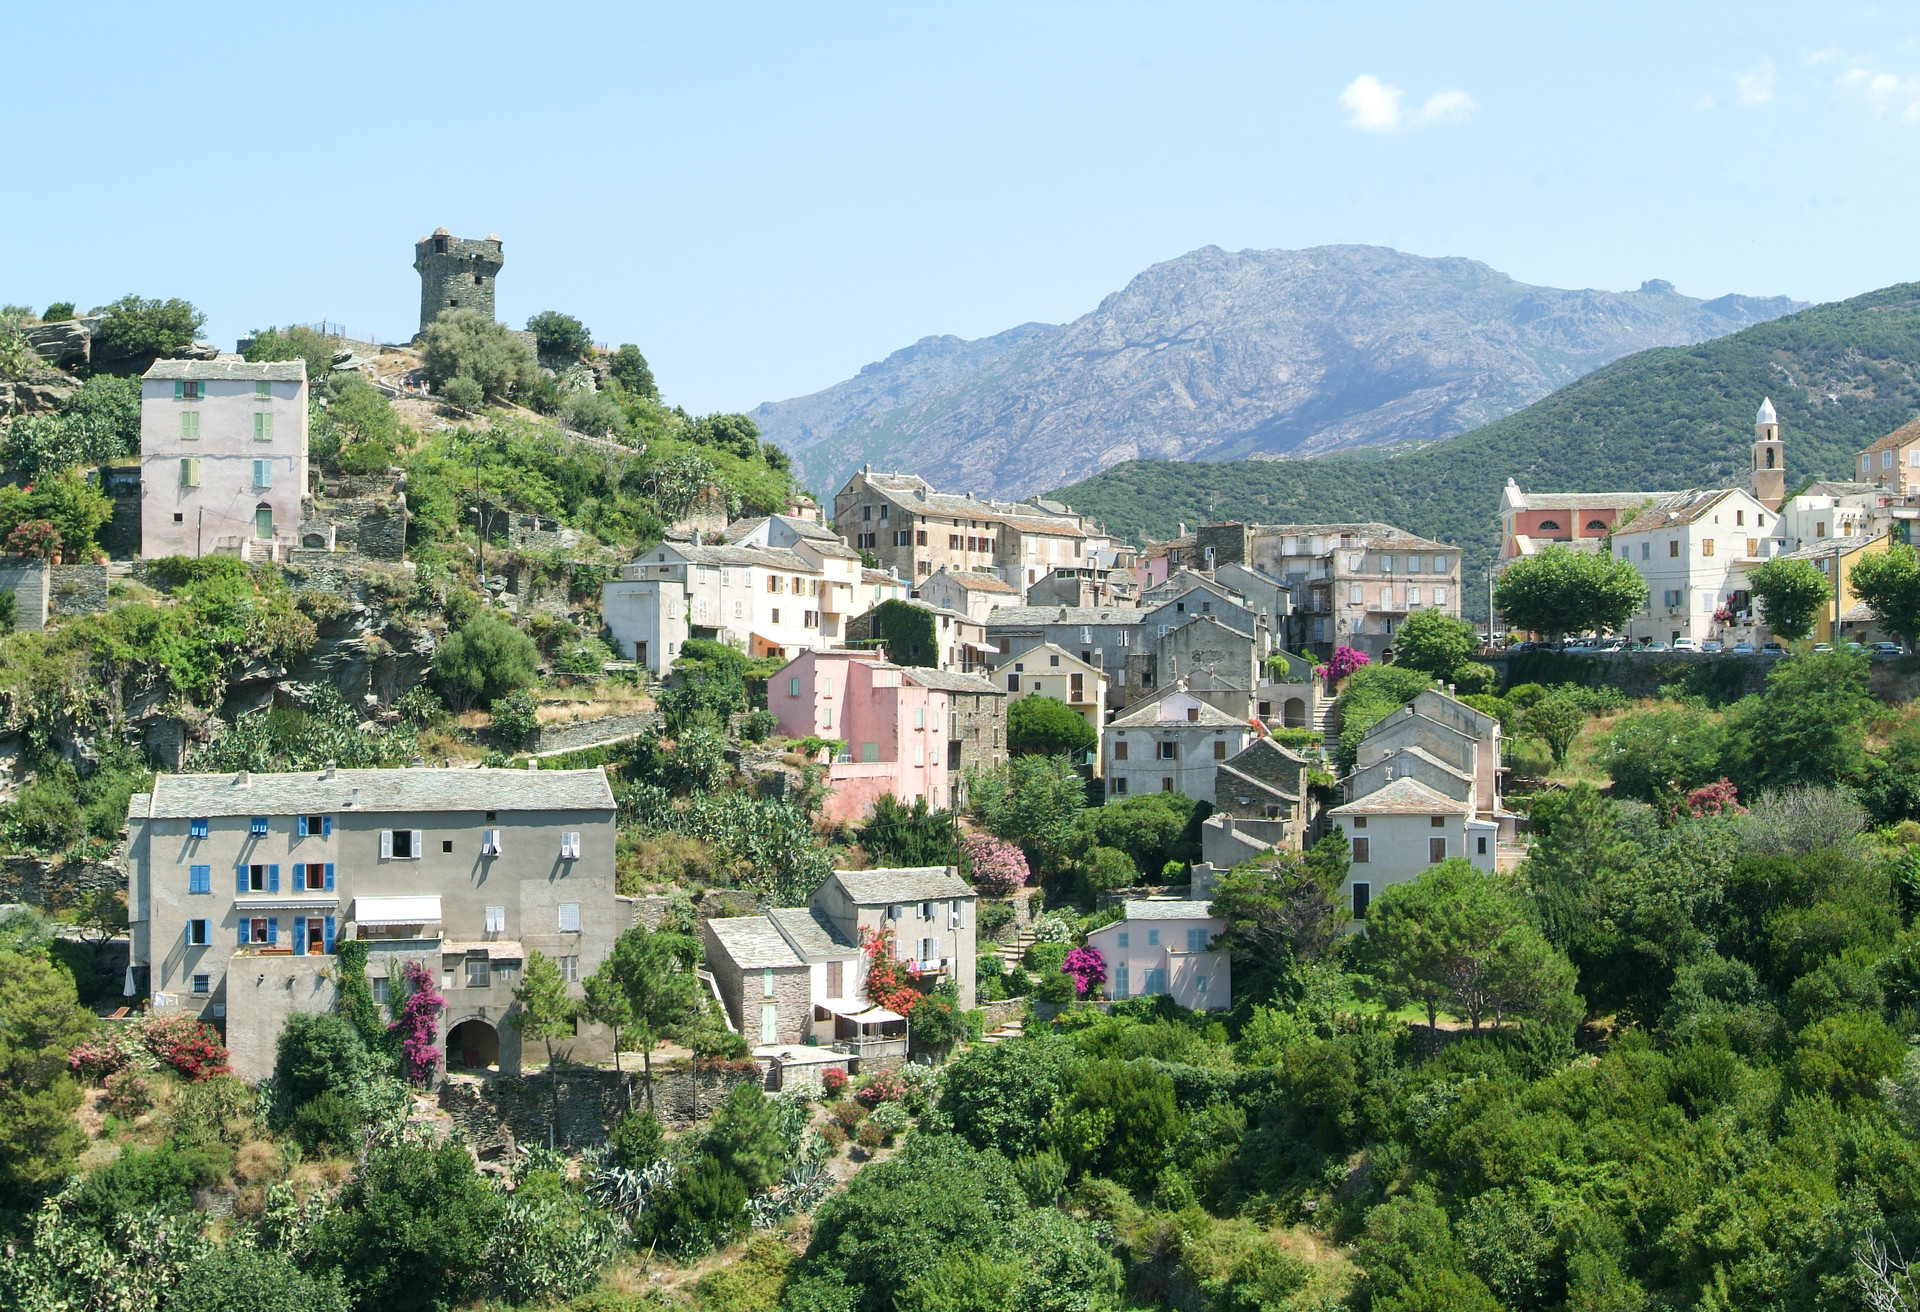 The village of Nonza on Corsica island, France